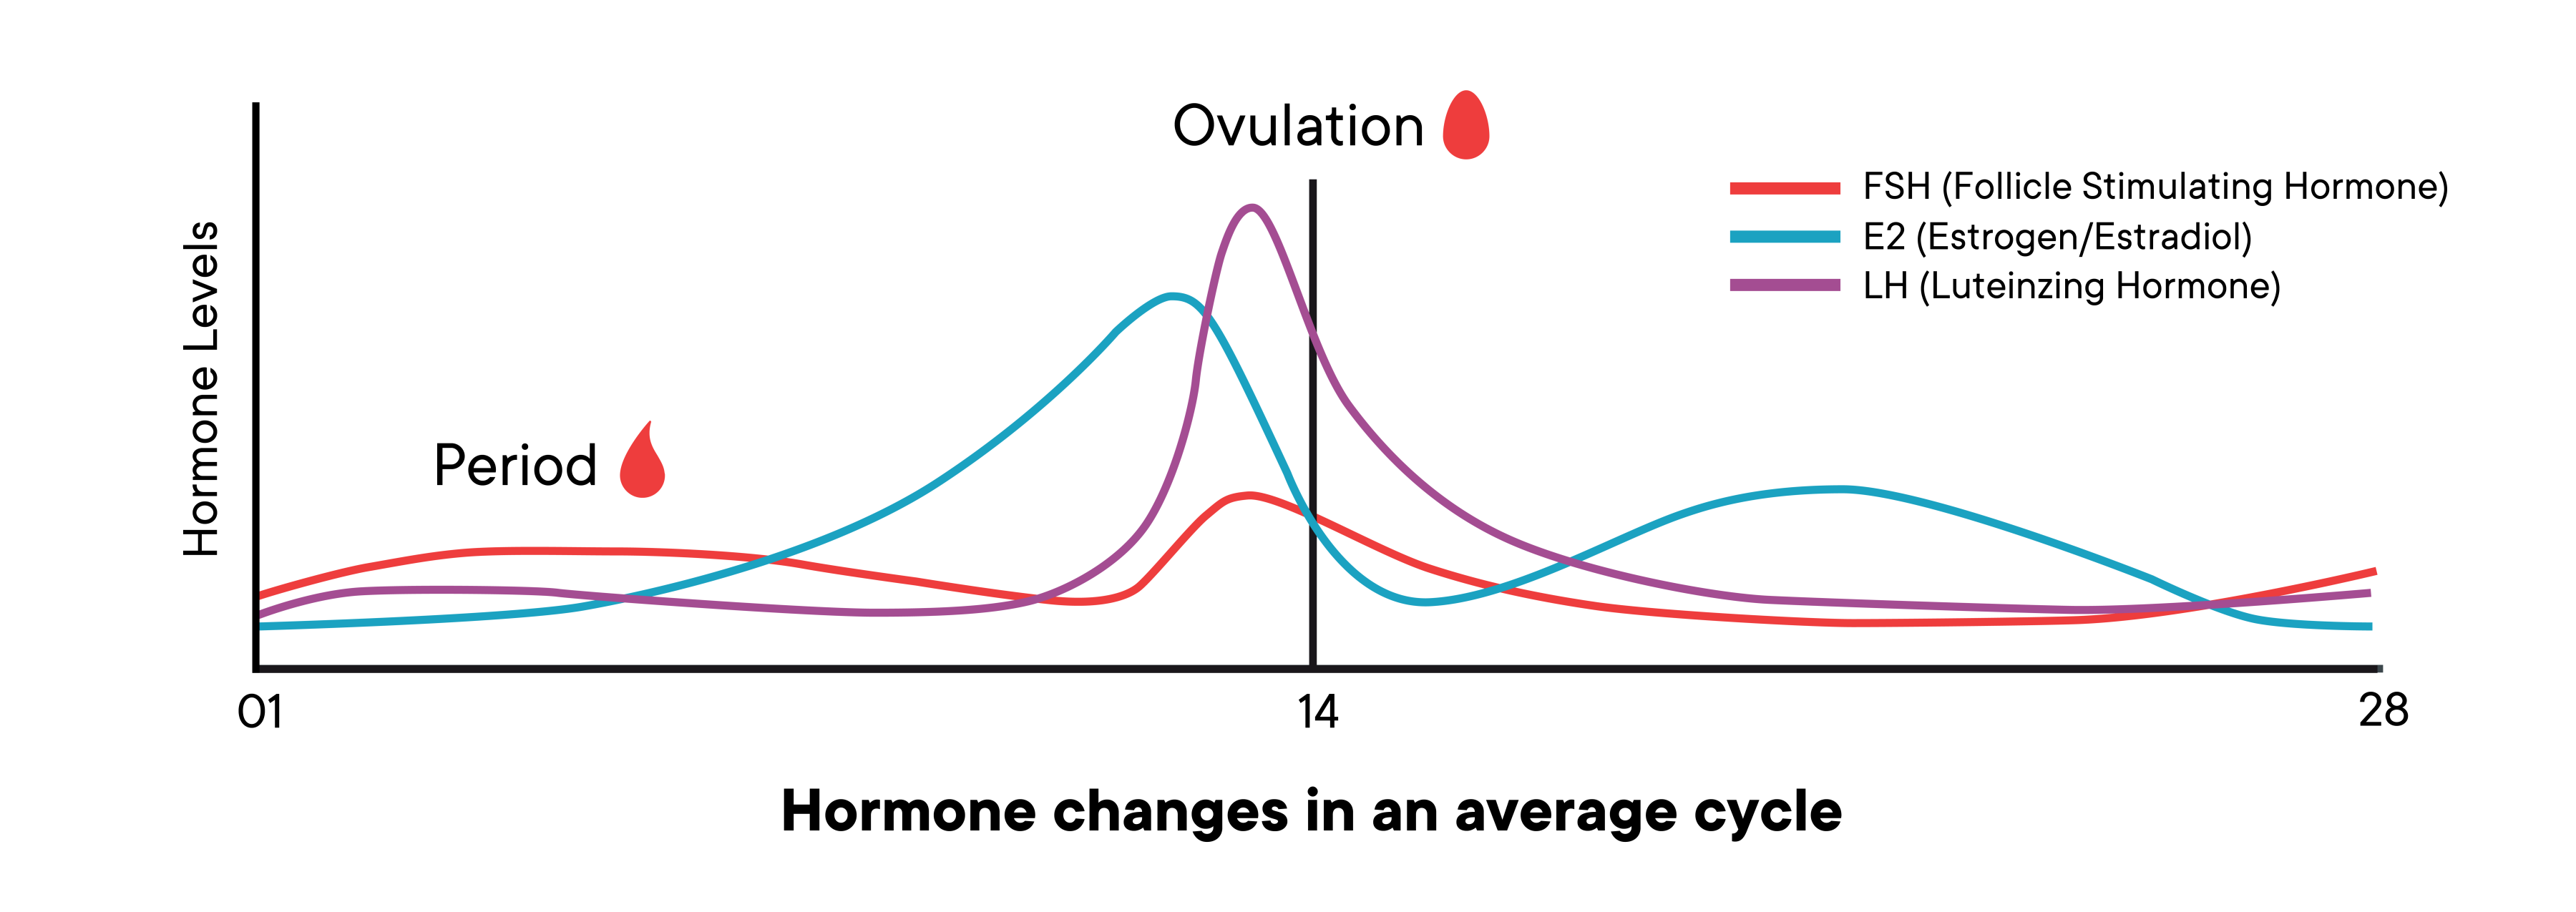 A graph showing the changes of hormone levels in an average cycle over time